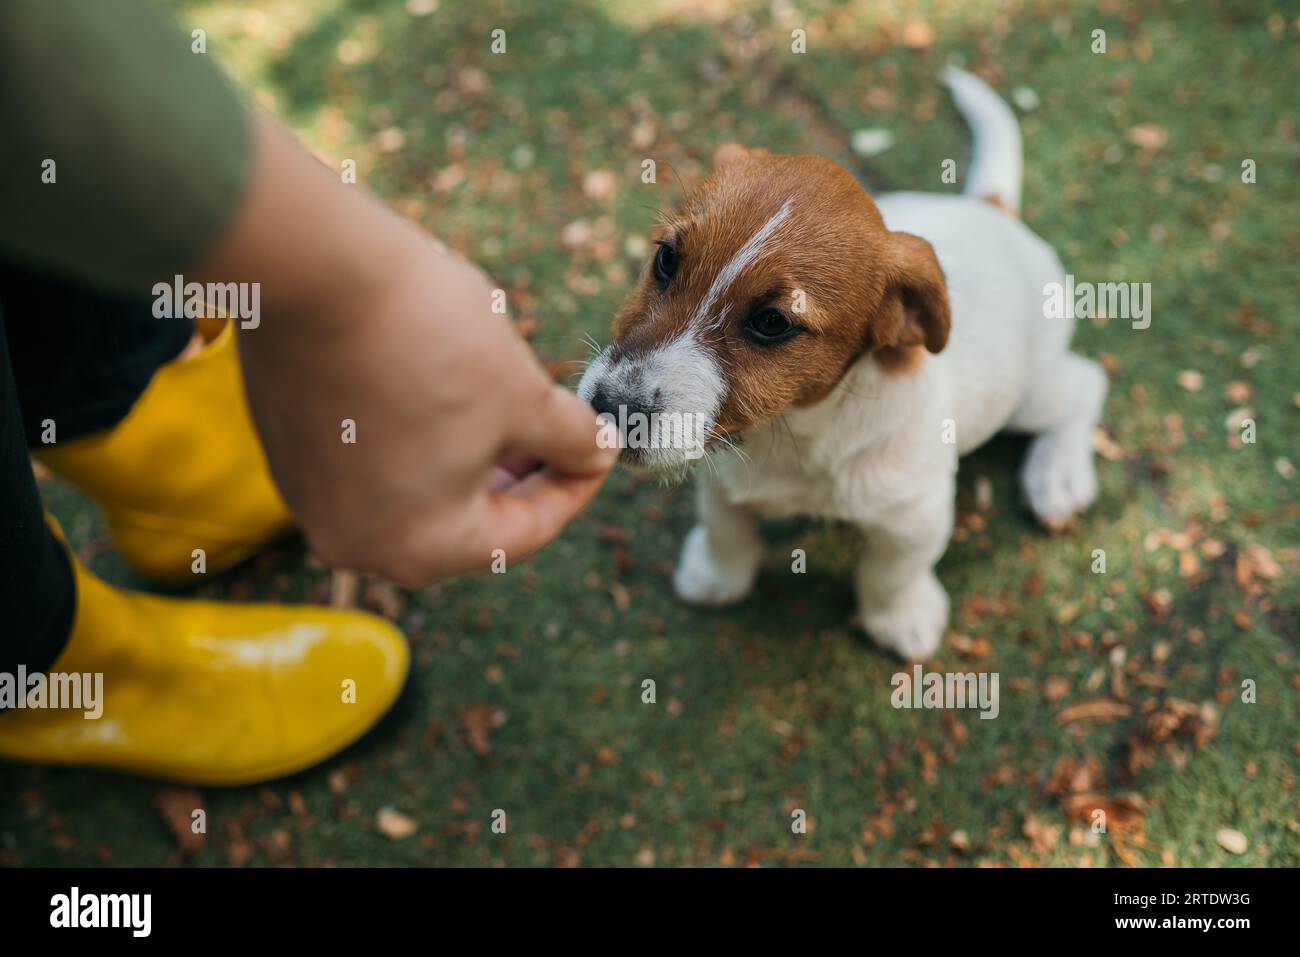 Cute little purebred Parson Jack Russell Terrier dog begging for food from his owner. Stock Photo